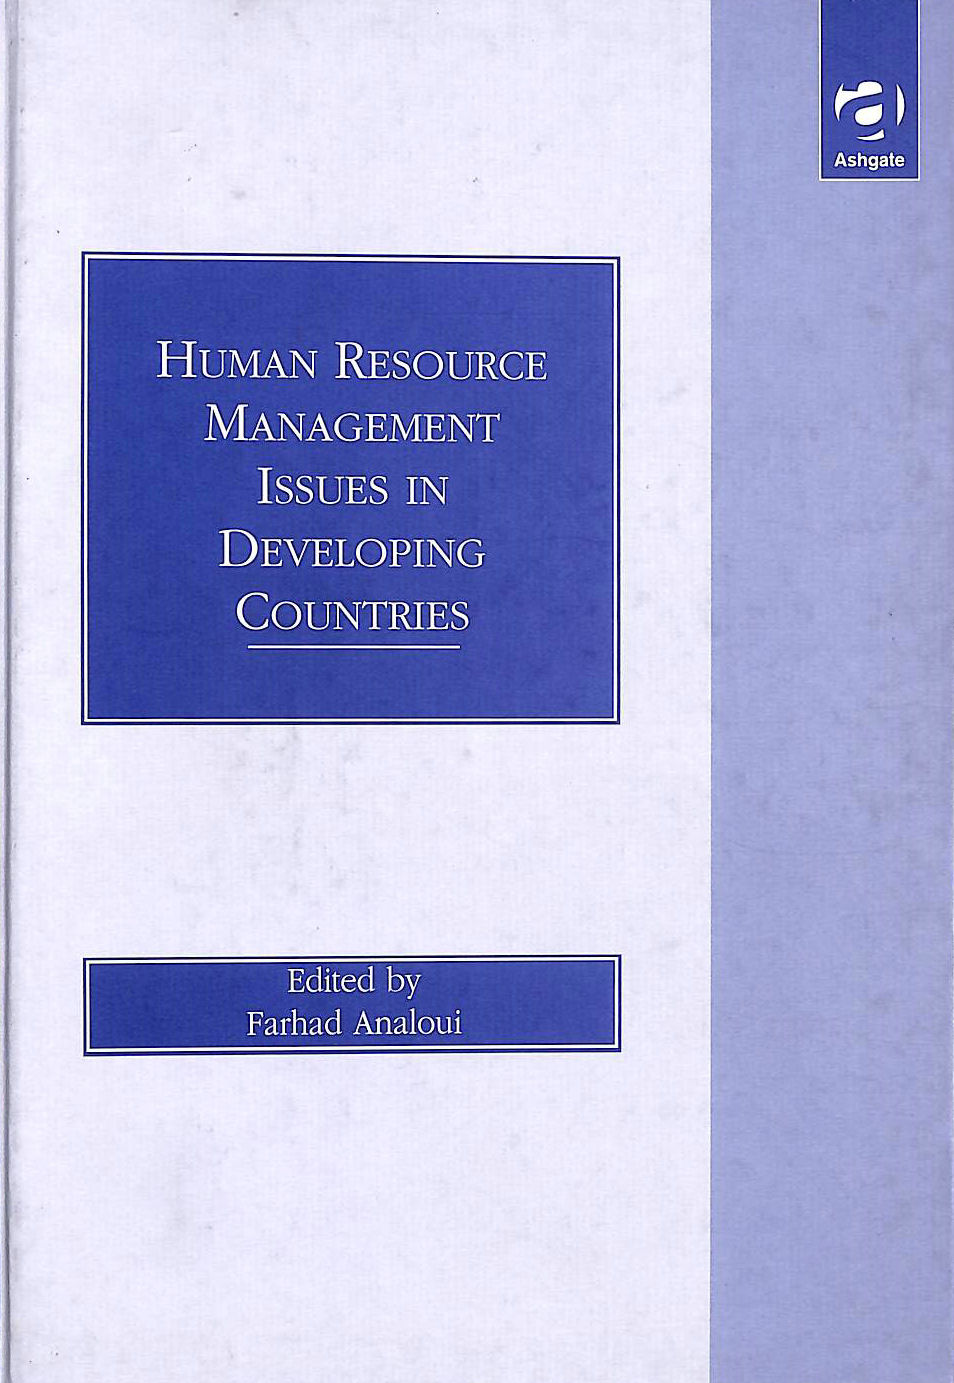 FARHAD ANALOUI - Human Resource Management Issues in Developing Countries